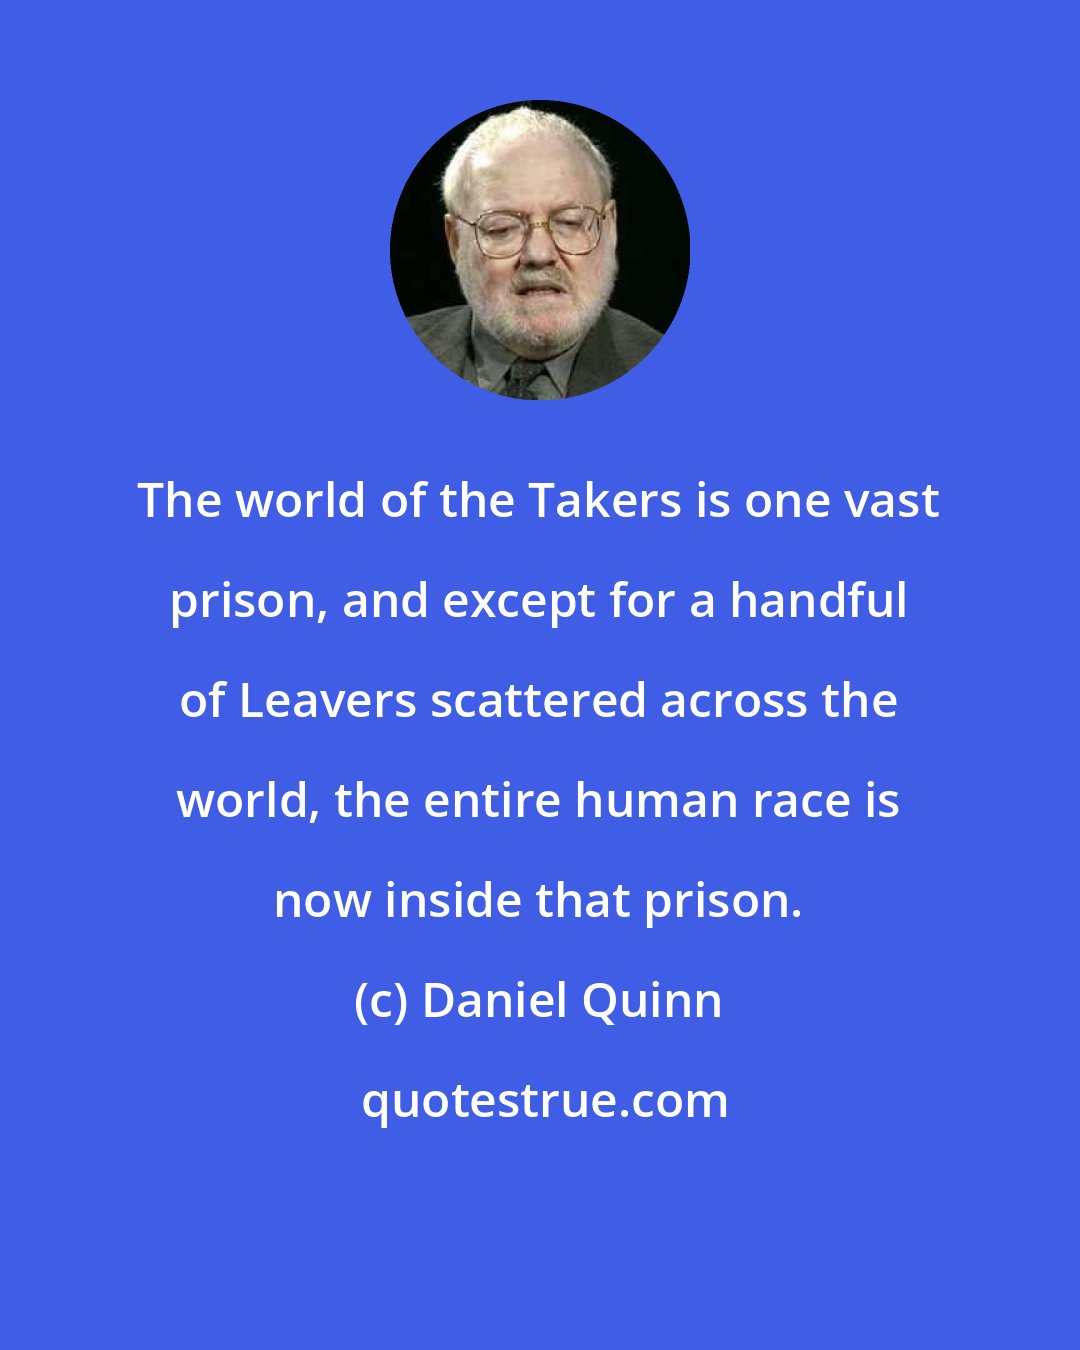 Daniel Quinn: The world of the Takers is one vast prison, and except for a handful of Leavers scattered across the world, the entire human race is now inside that prison.